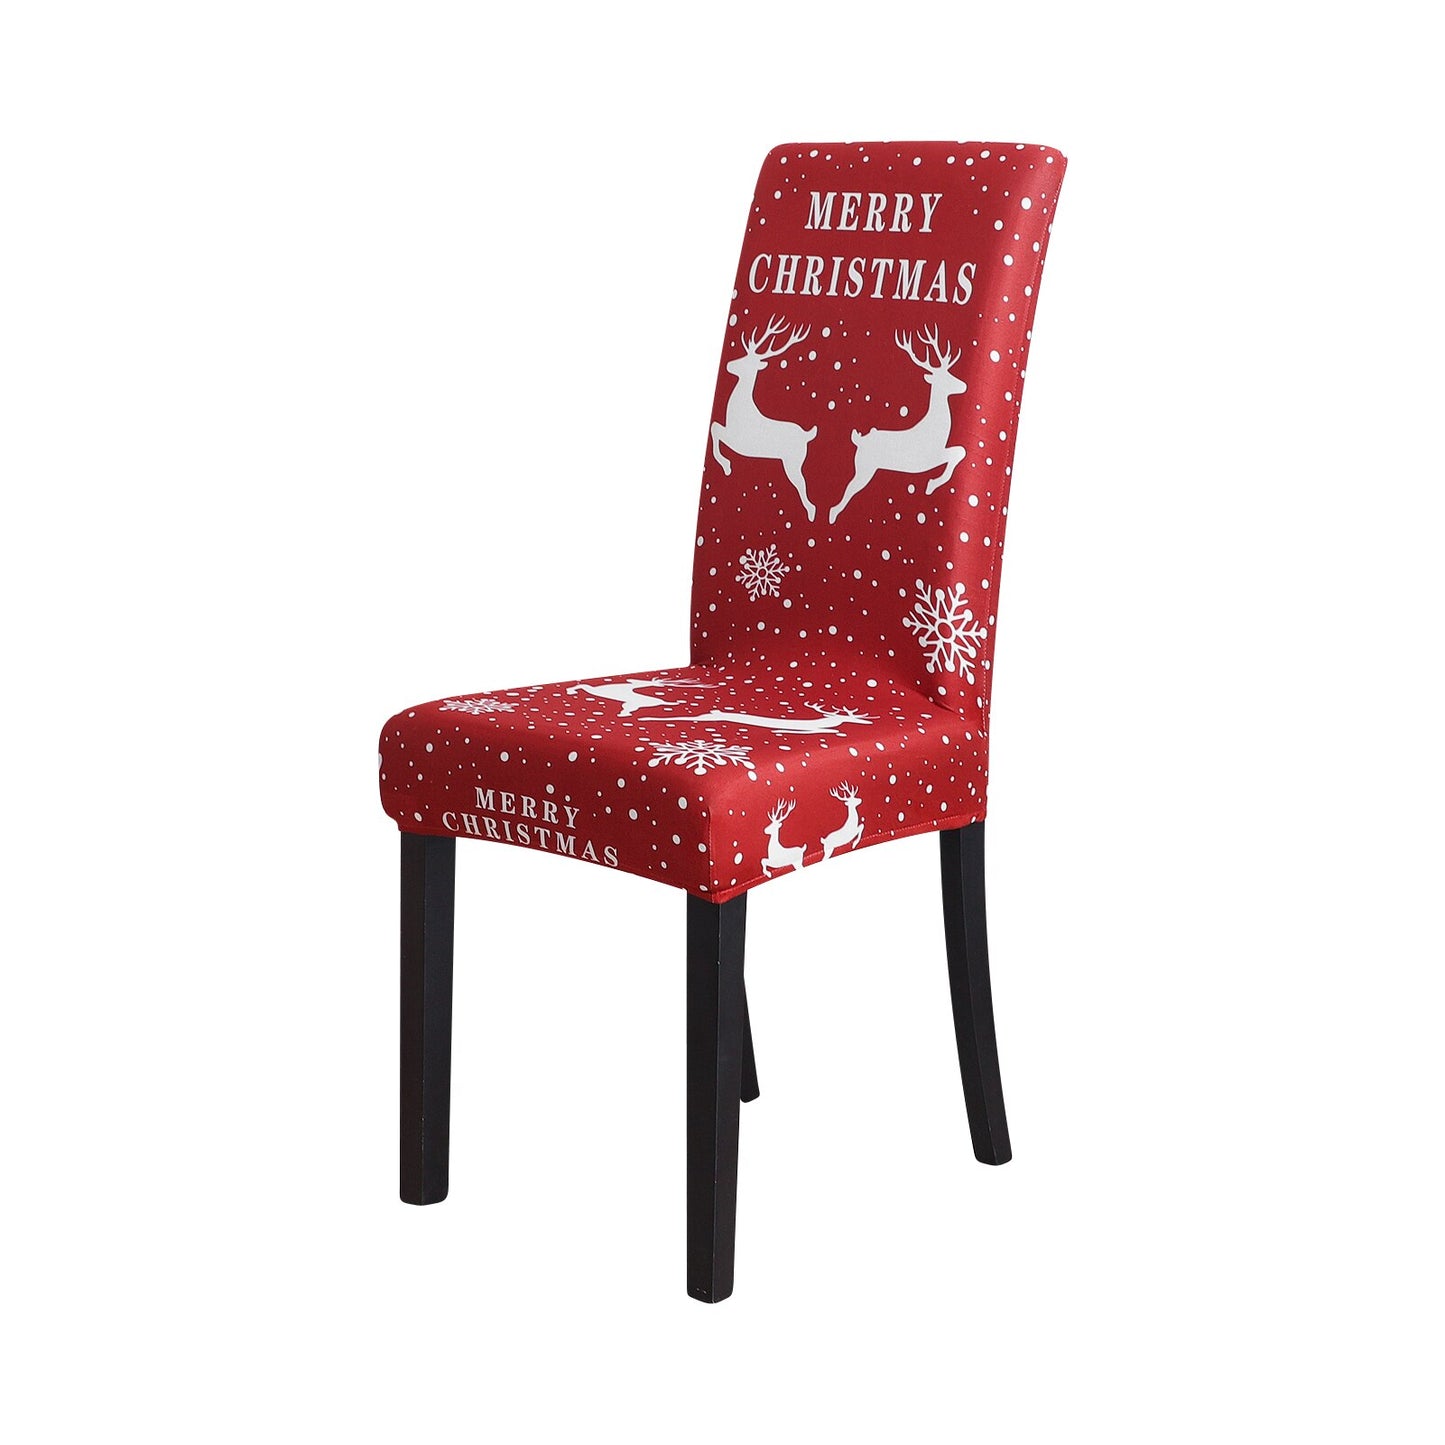 New - chair covers elastic limited Christmas edition